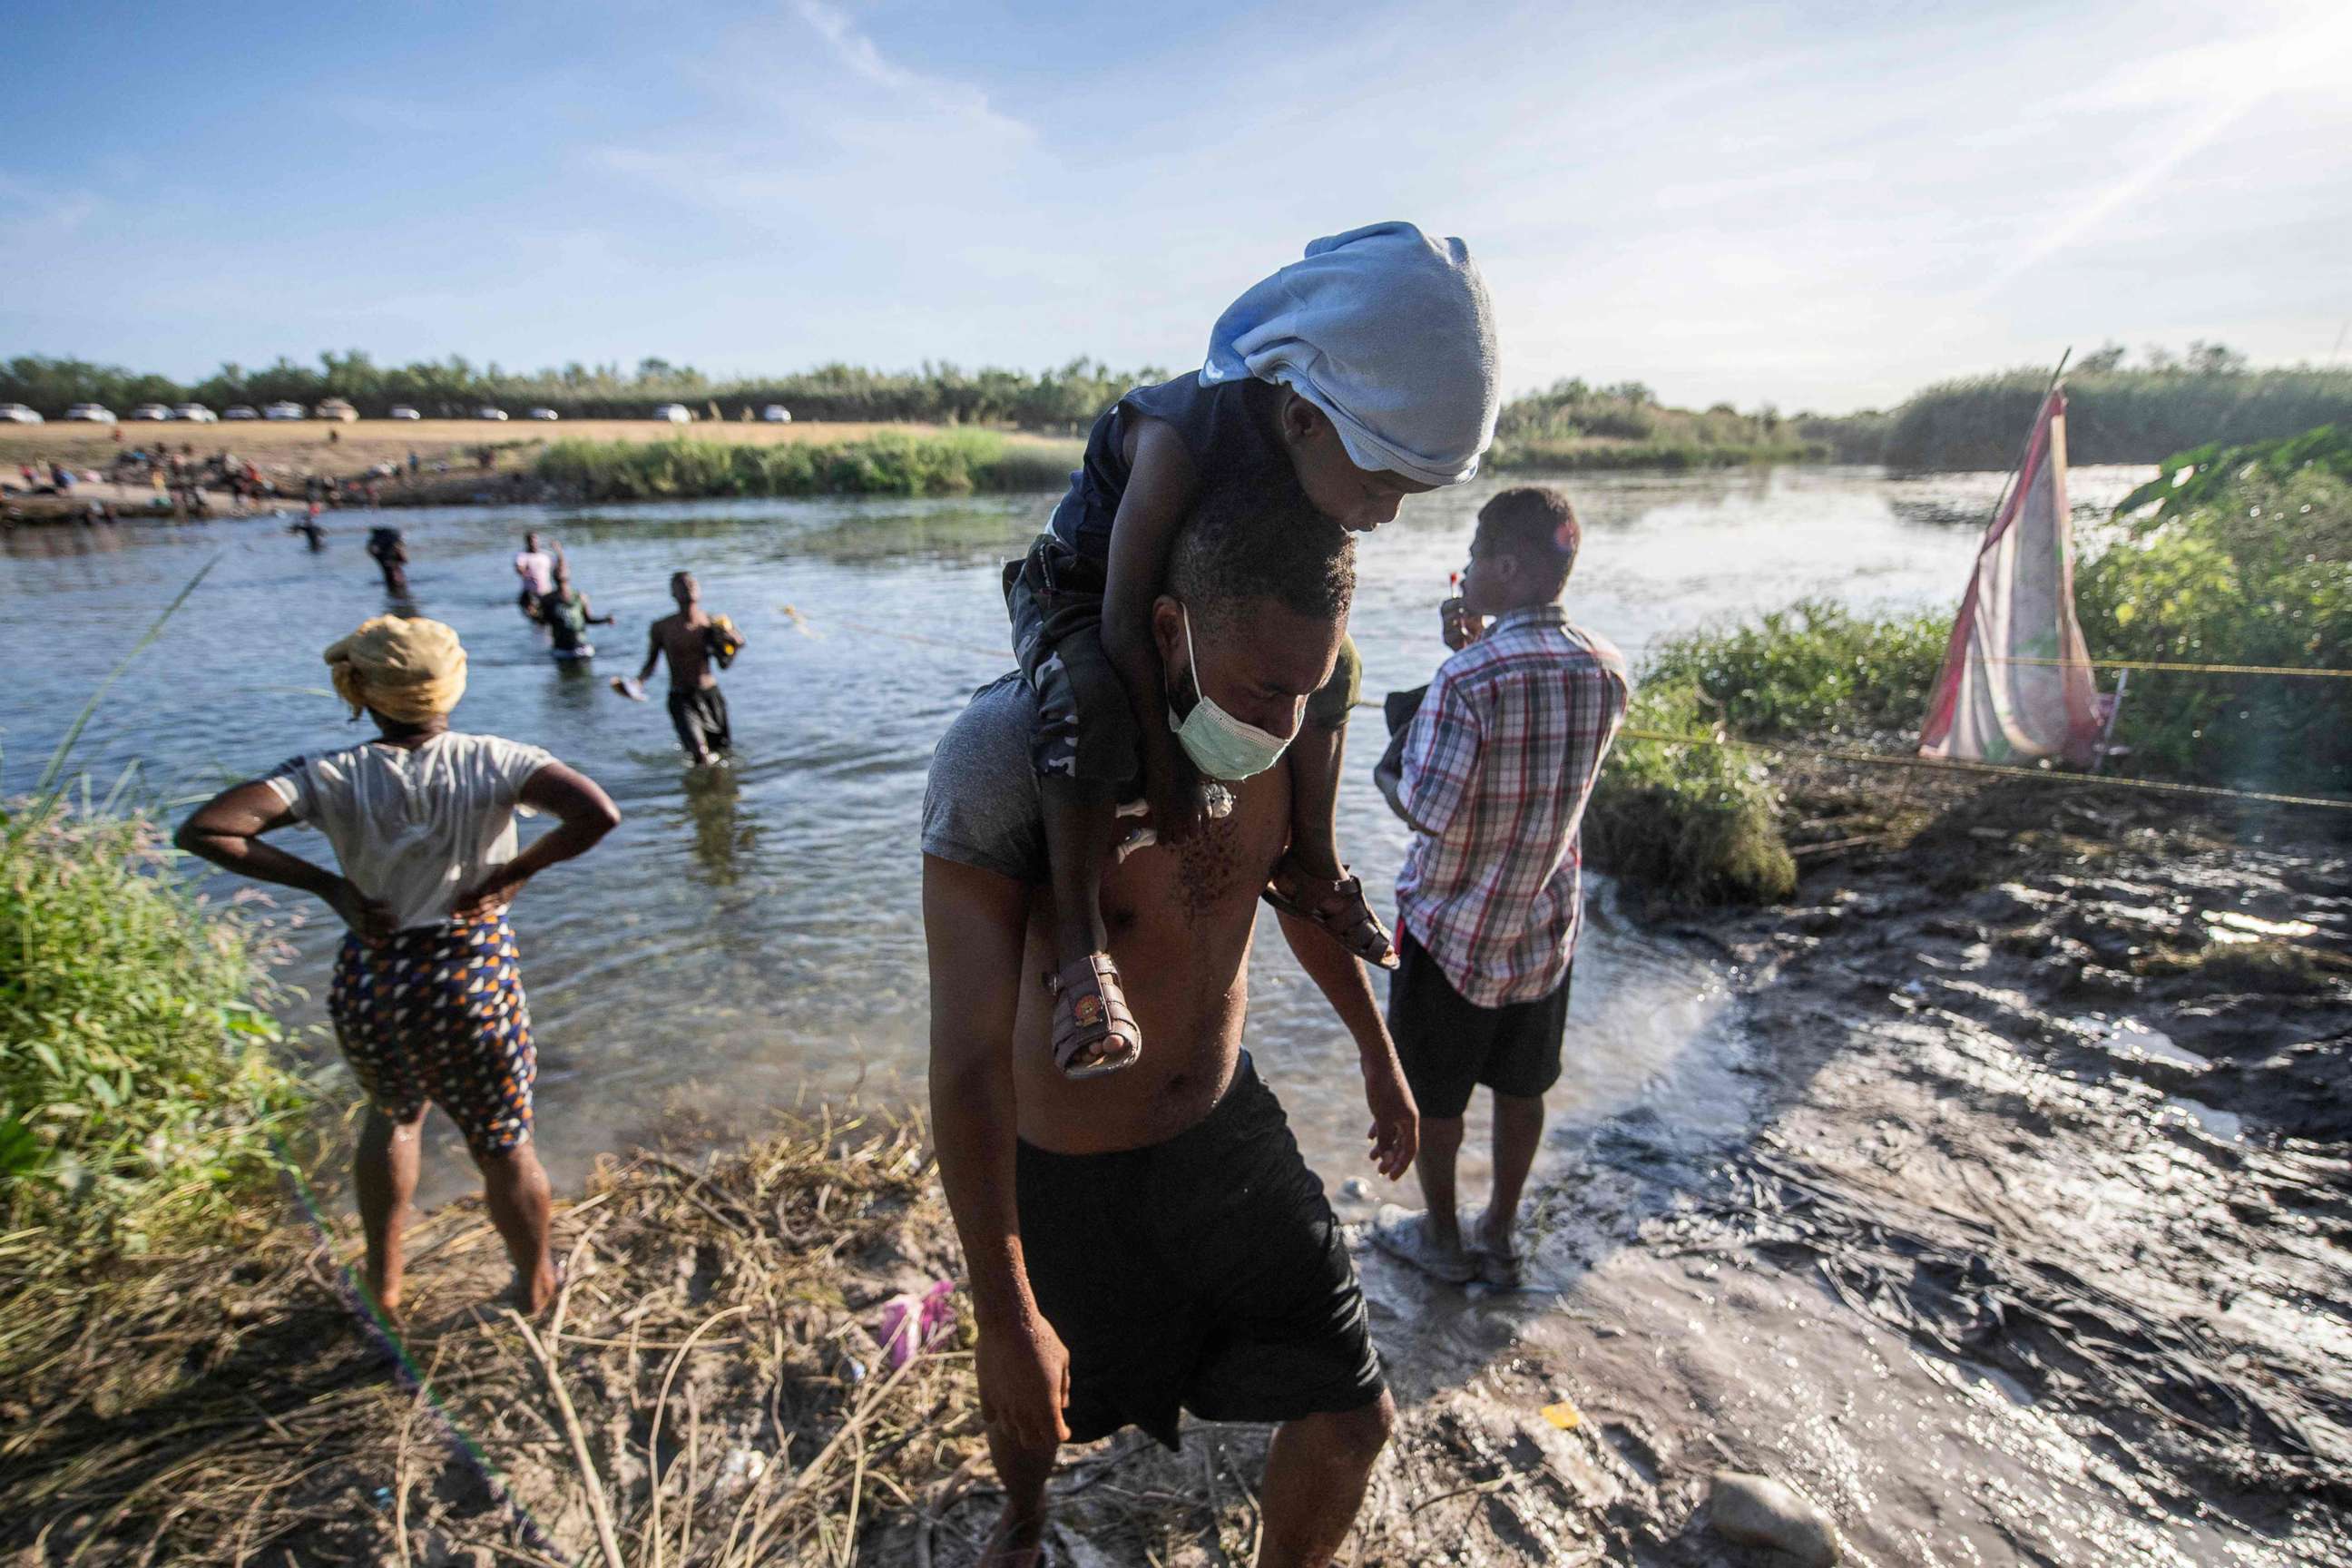 PHOTO: Haitian migrants cross the Rio Grande river to get food and water in Mexico, as seen from Ciudad Acuna, Coahuila state, Mexico on Sept. 22, 2021.